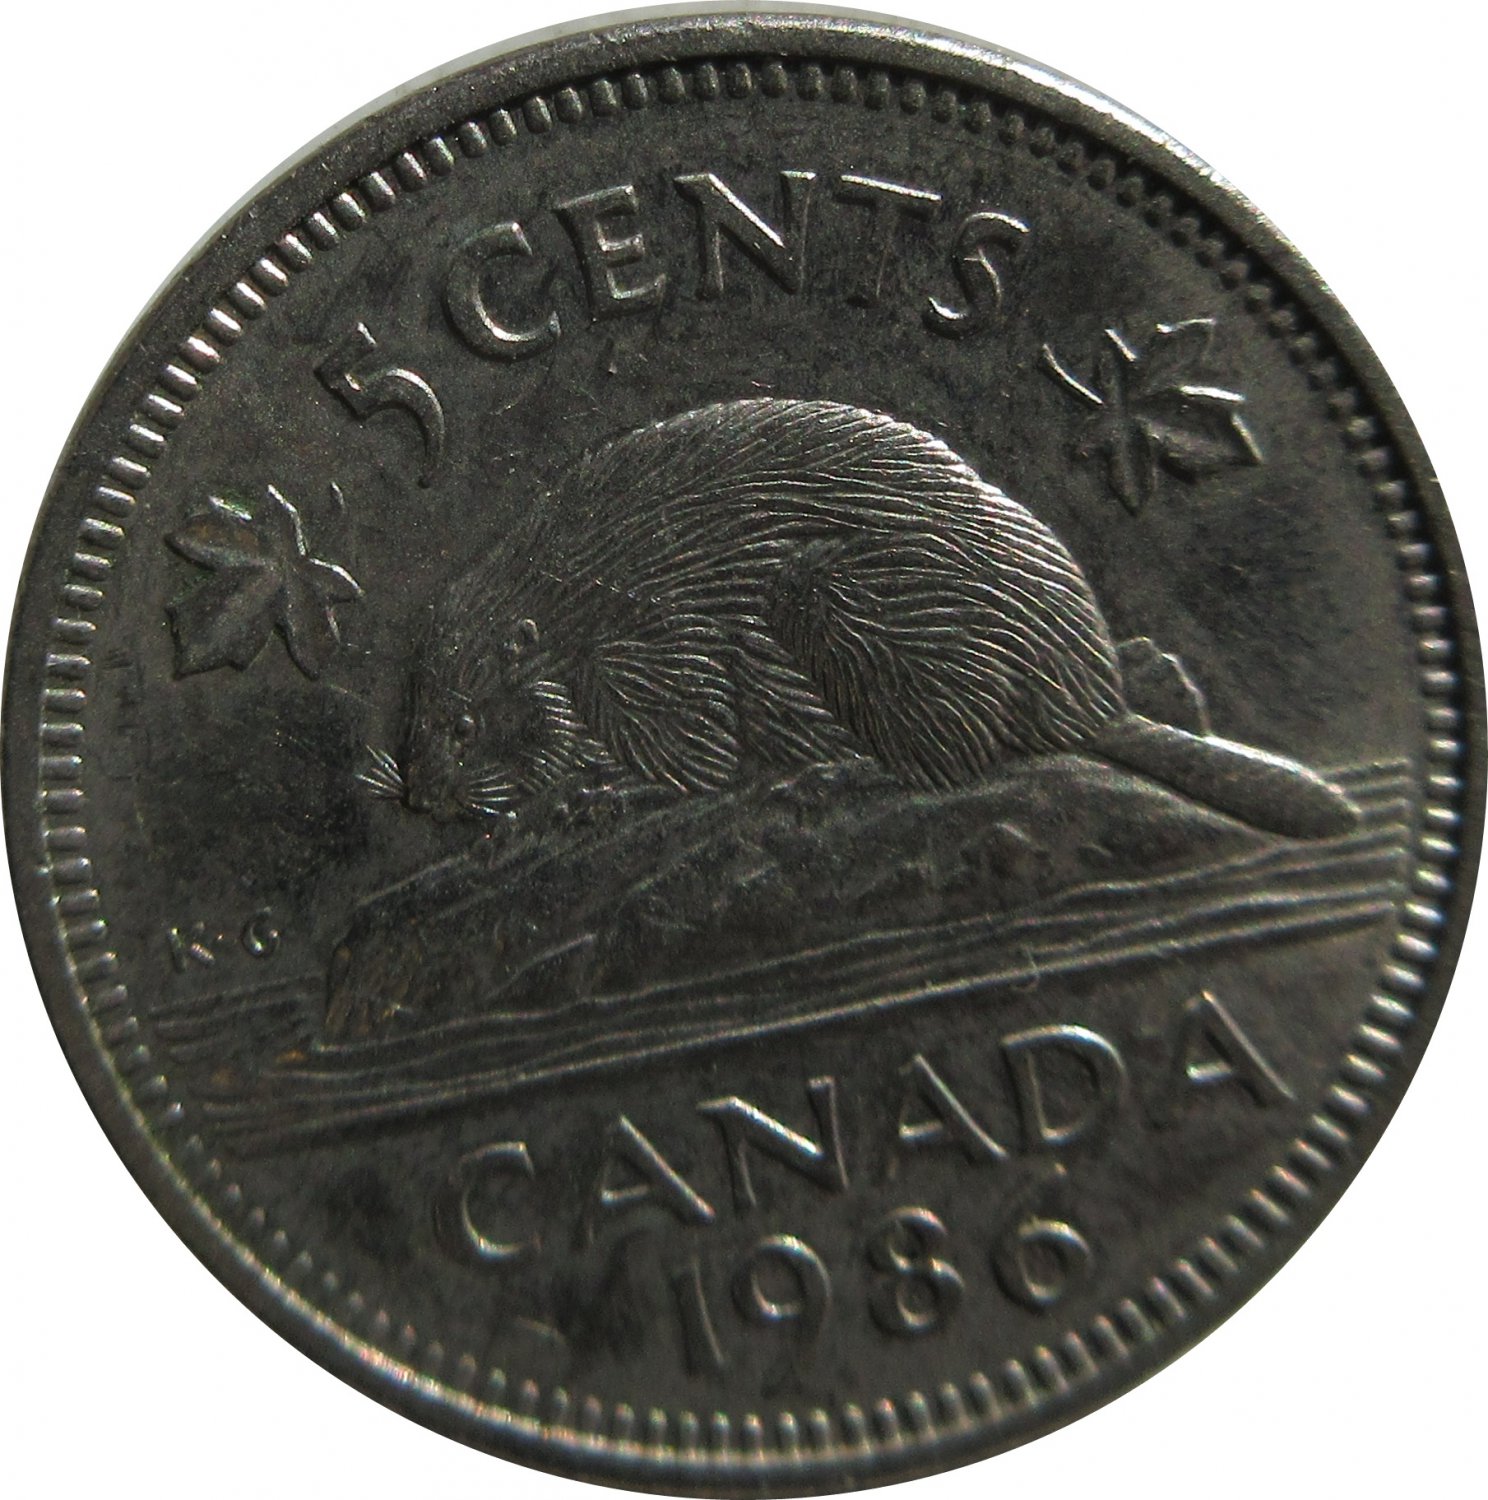 1986 Canadian 5 Cent